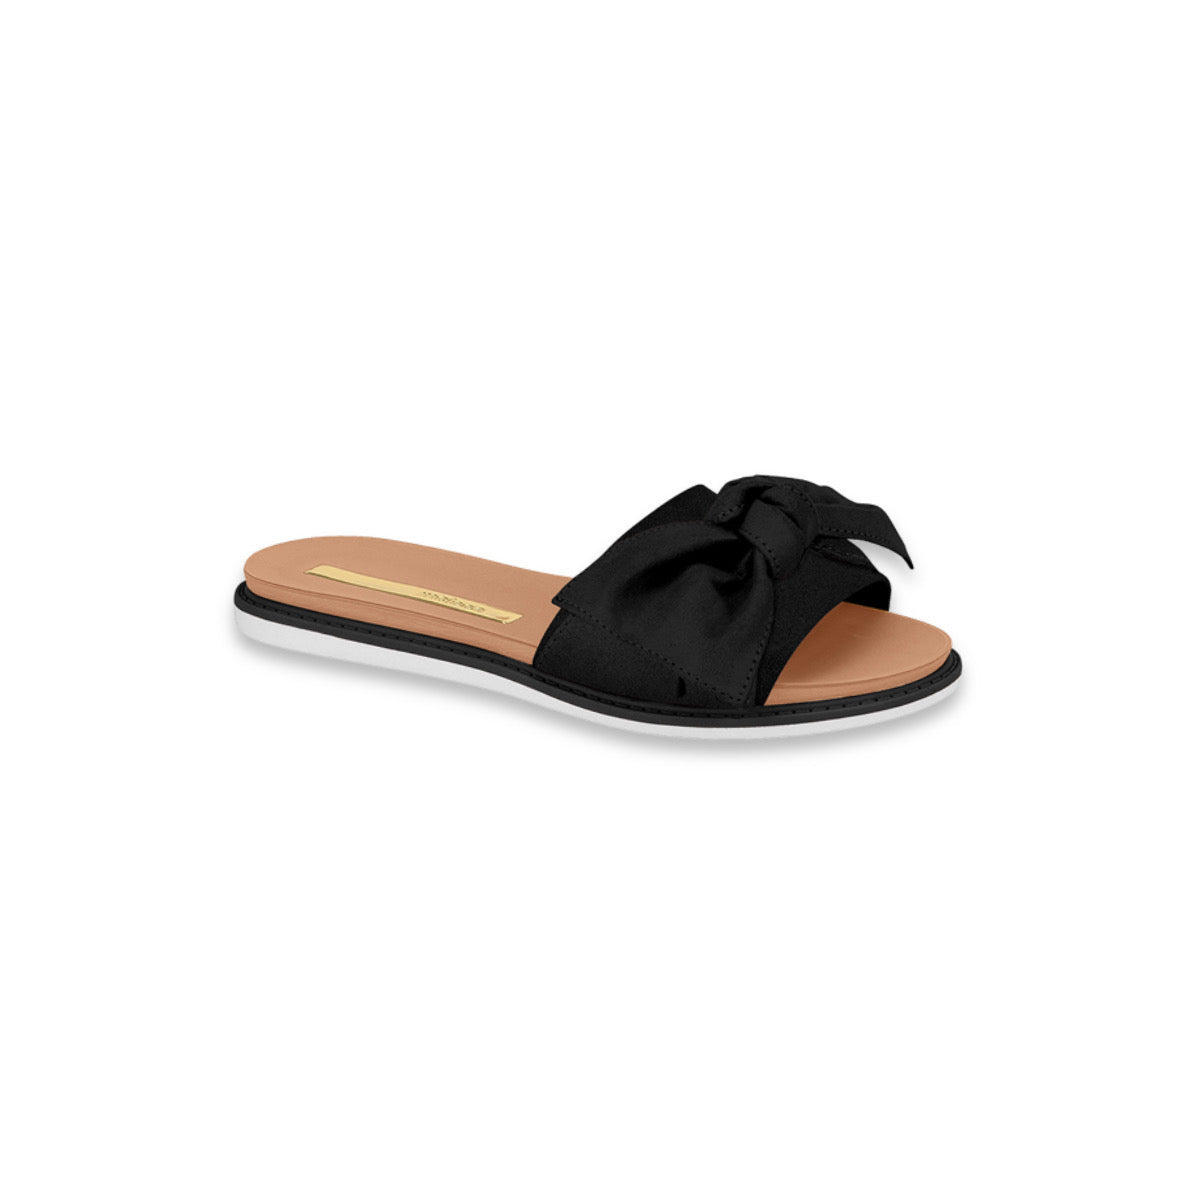 Asia – Inspired Sandals